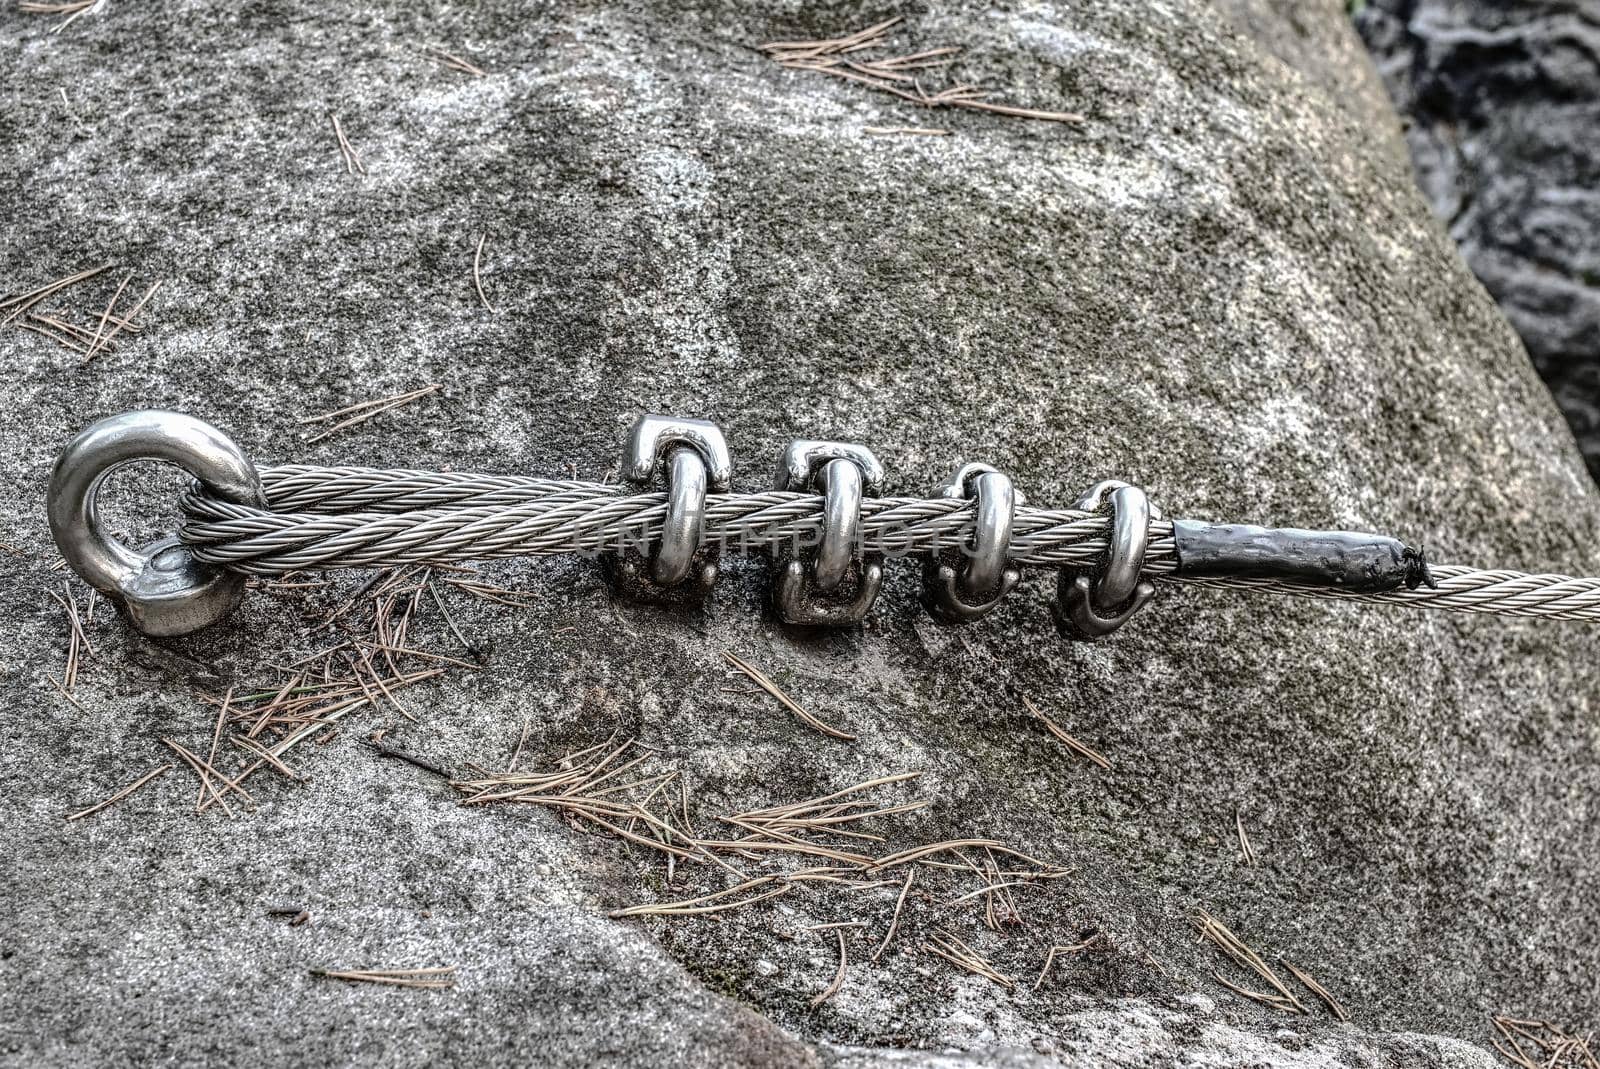 Detail of via ferrata cable attached to stainless rod by rdonar2